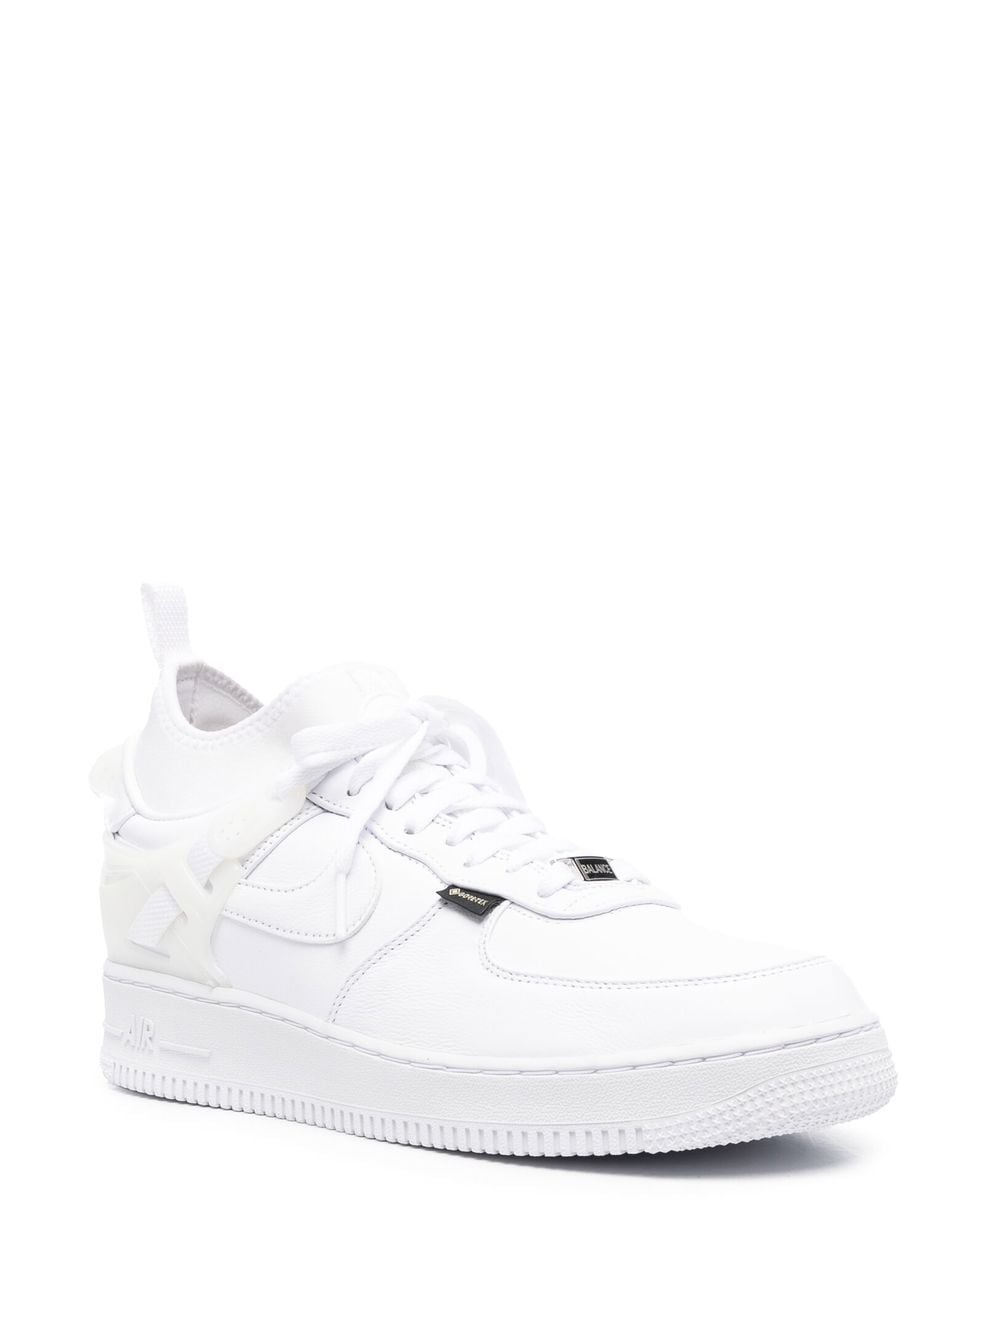 Nike-OUTLET-SALE-Nike x Undercover Air Force 1 Low SP Sneakers-ARCHIVIST